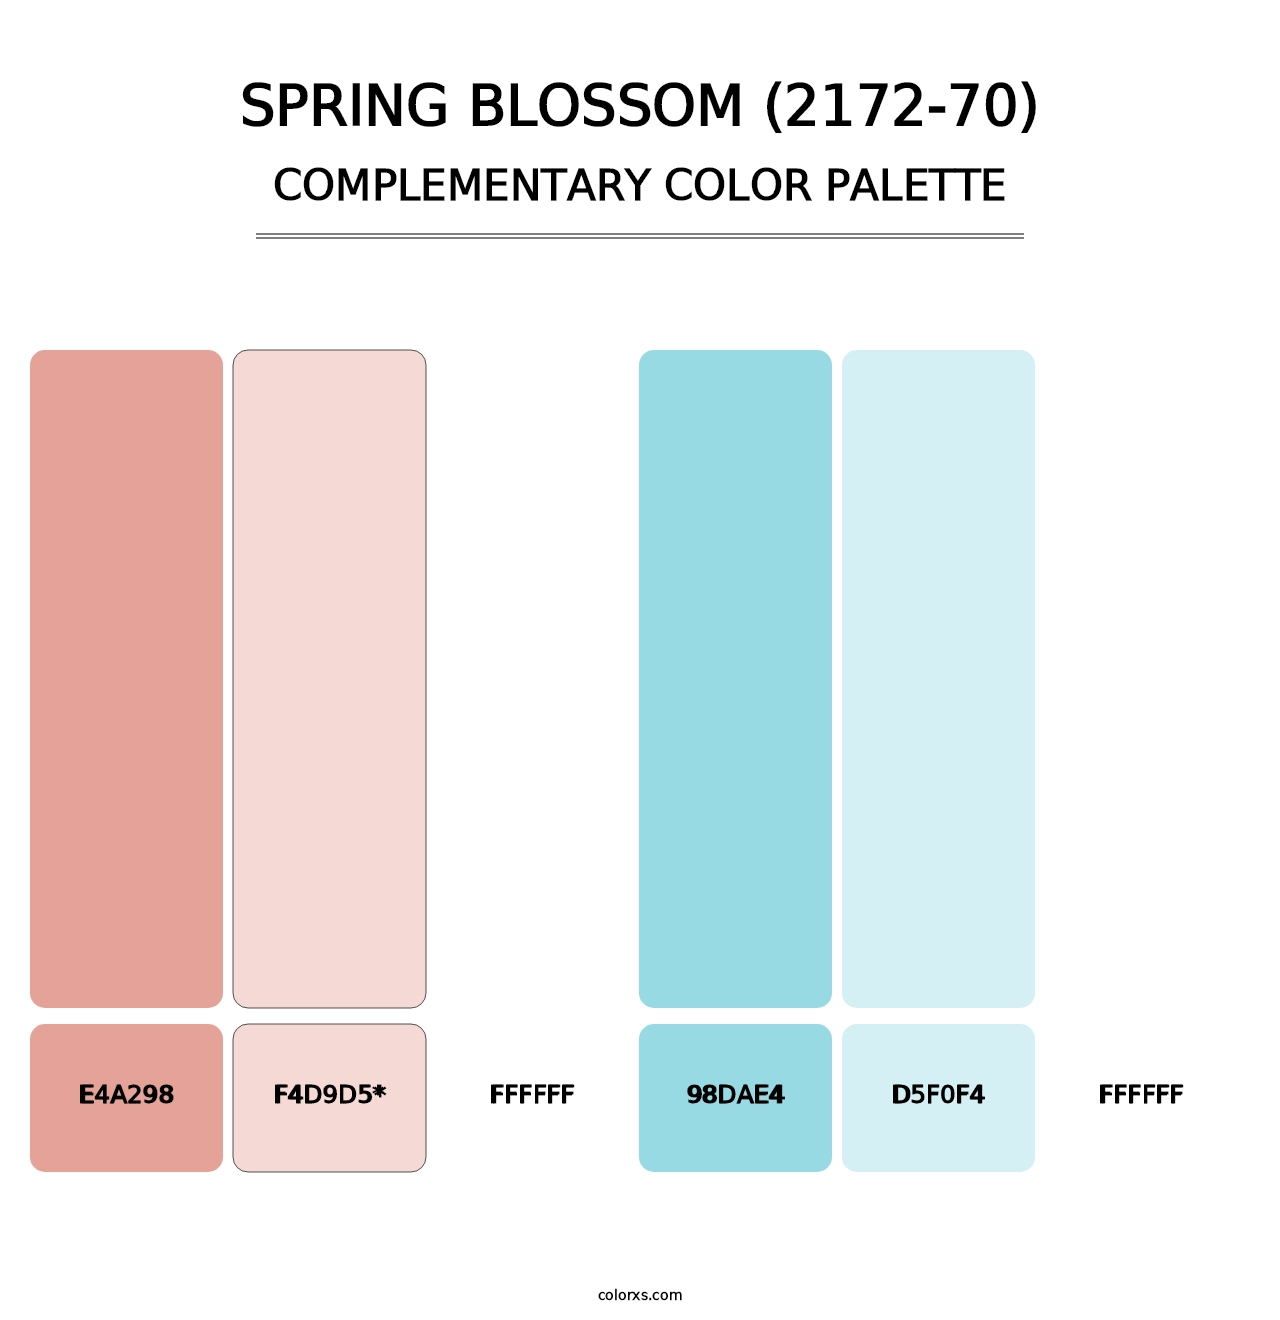 Spring Blossom (2172-70) - Complementary Color Palette